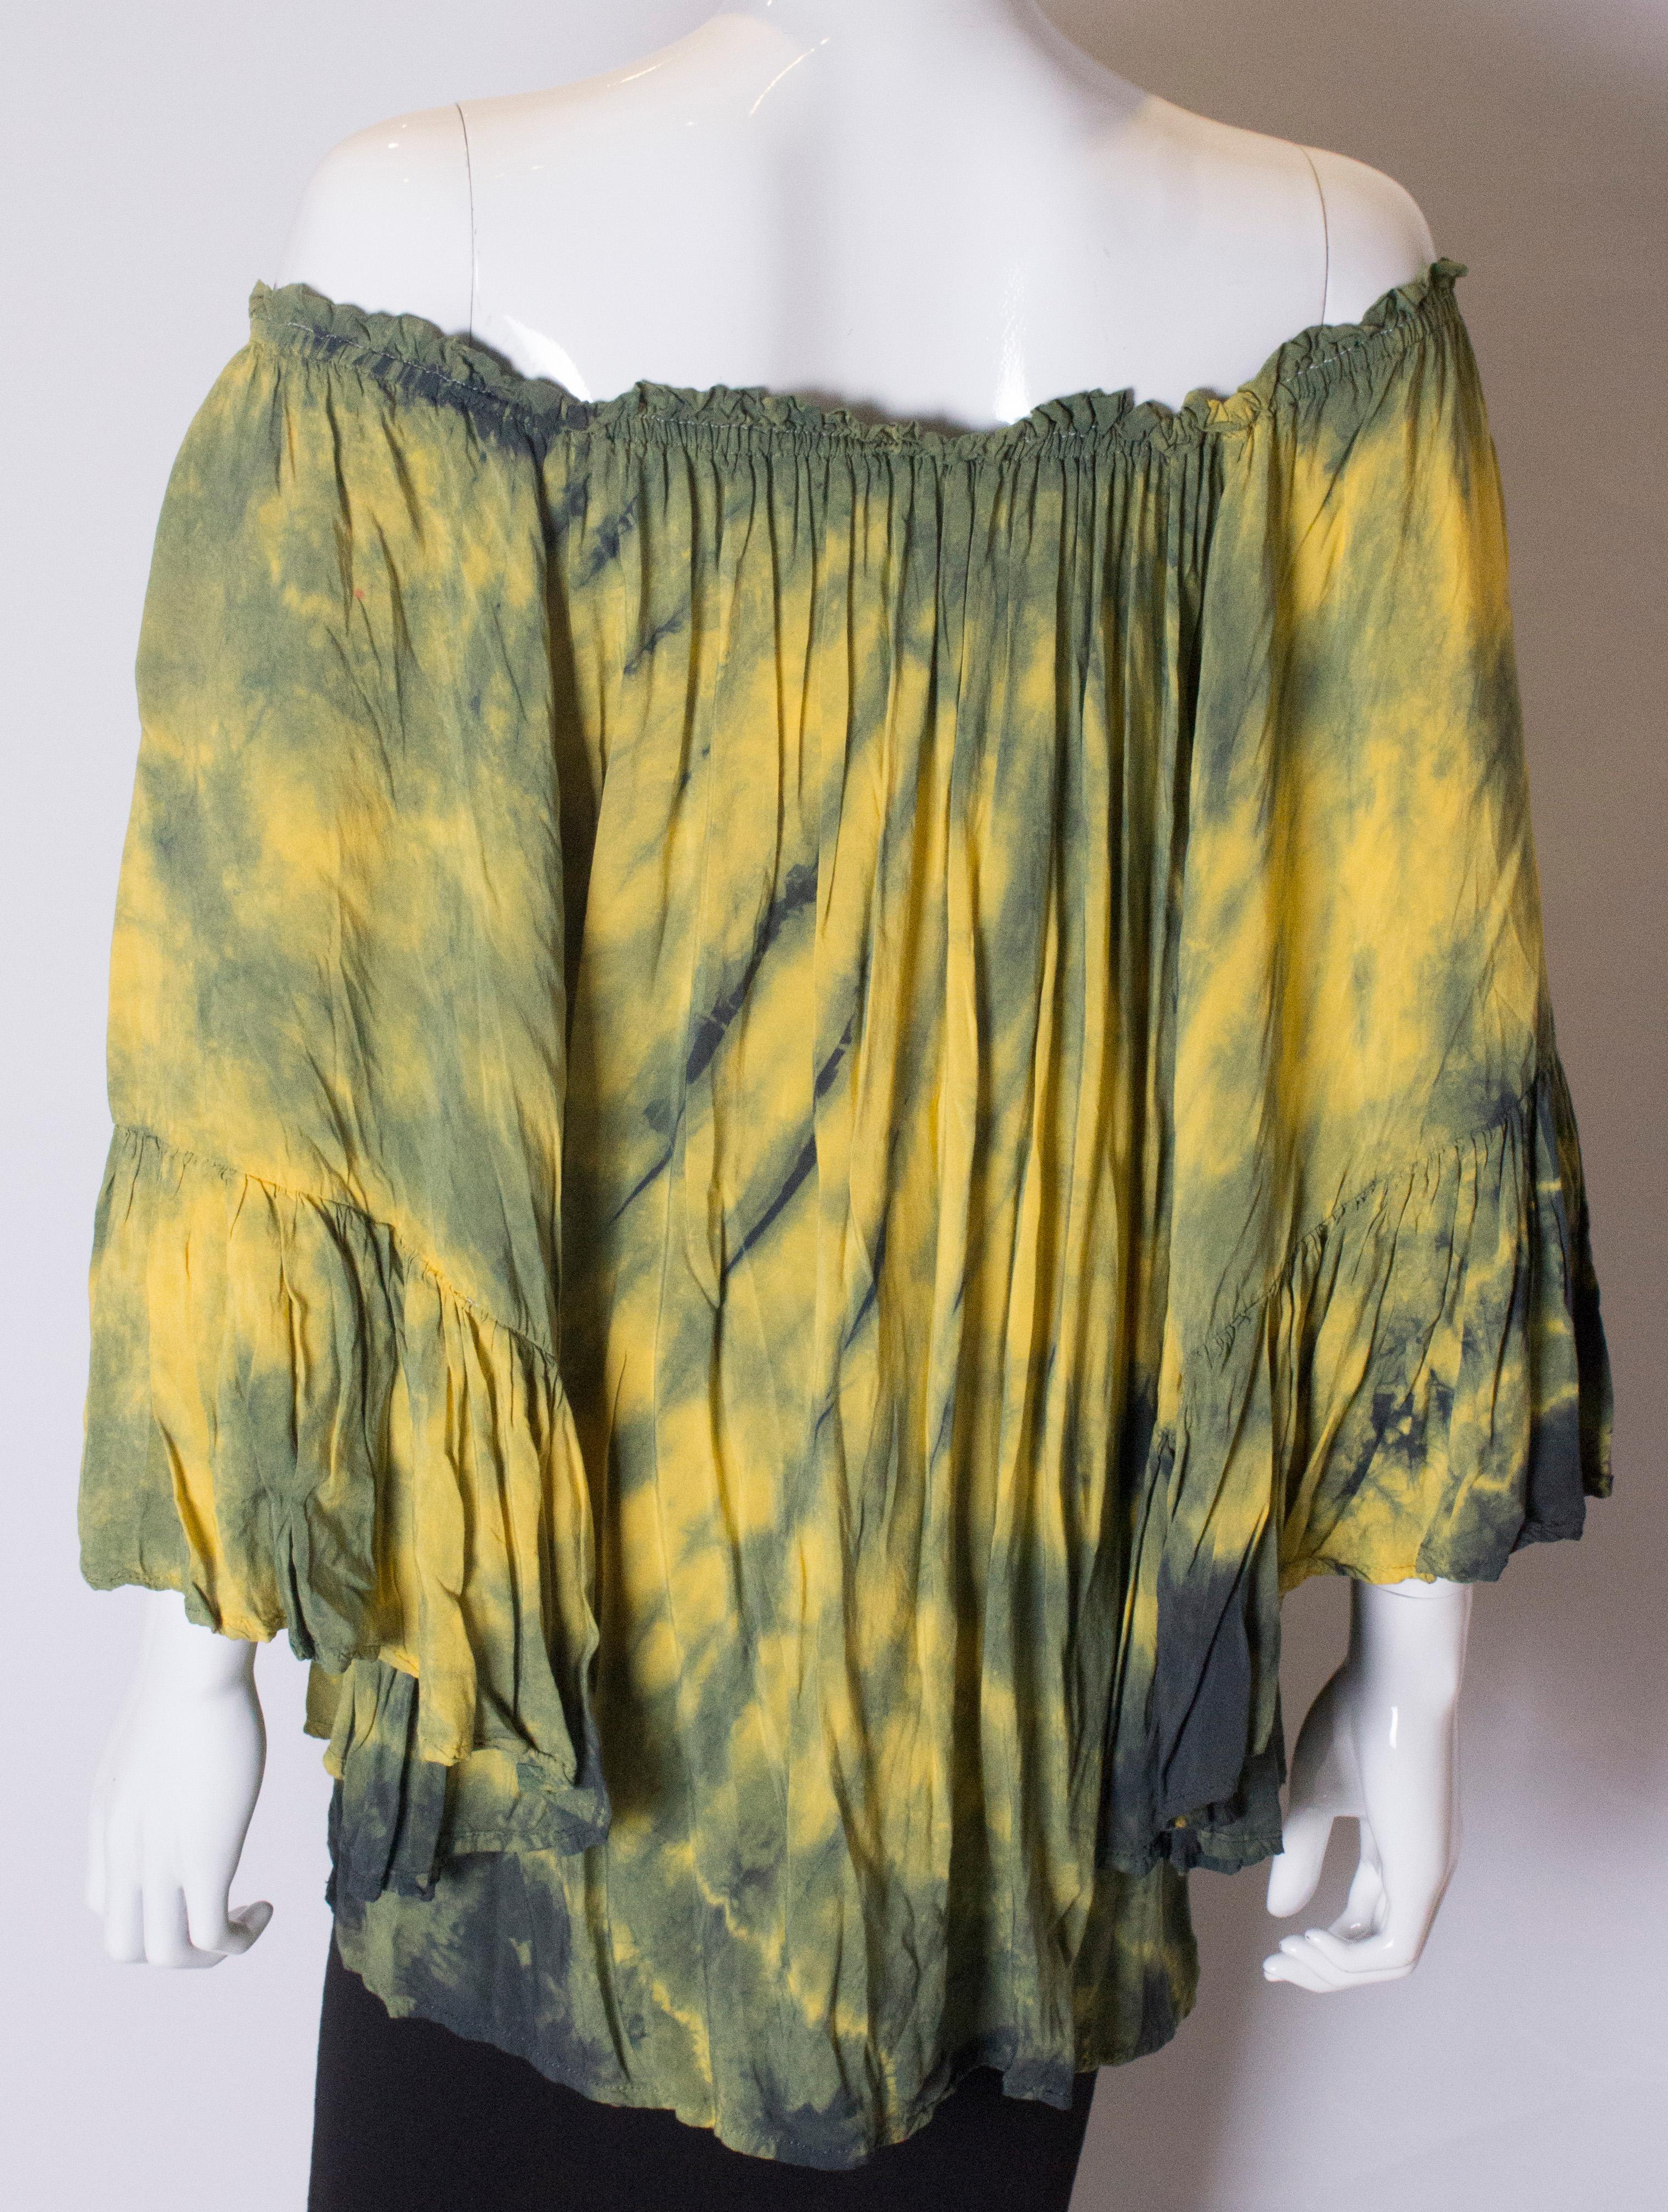 Vintage Boho Tie dye yellow and green top 3